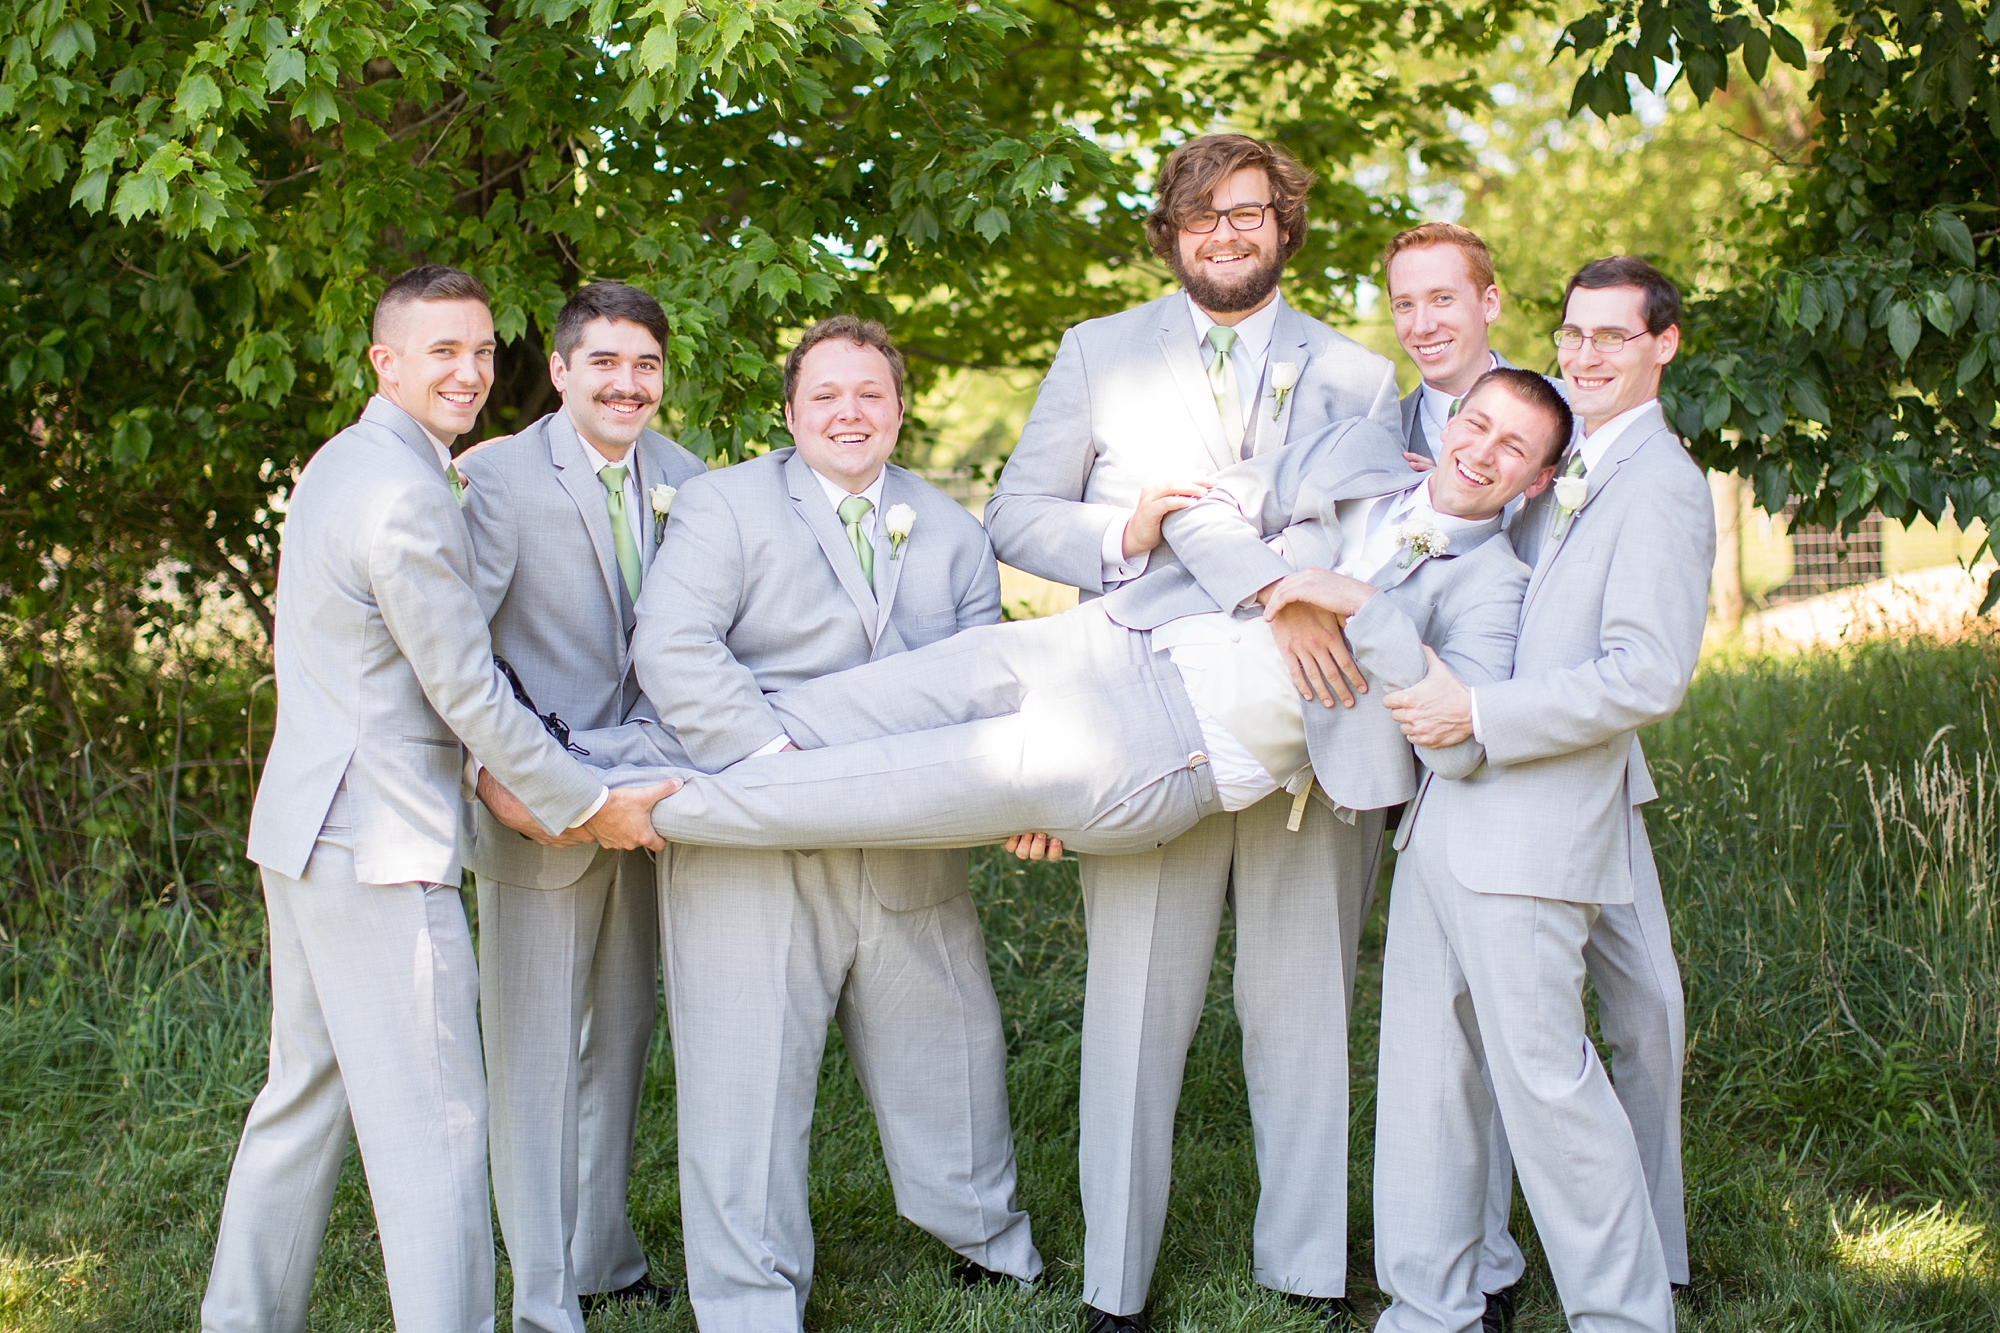 Mroz 2-Bridal Party-213_anna grace photography top of the bay maryland wedding photographer photo.jpg